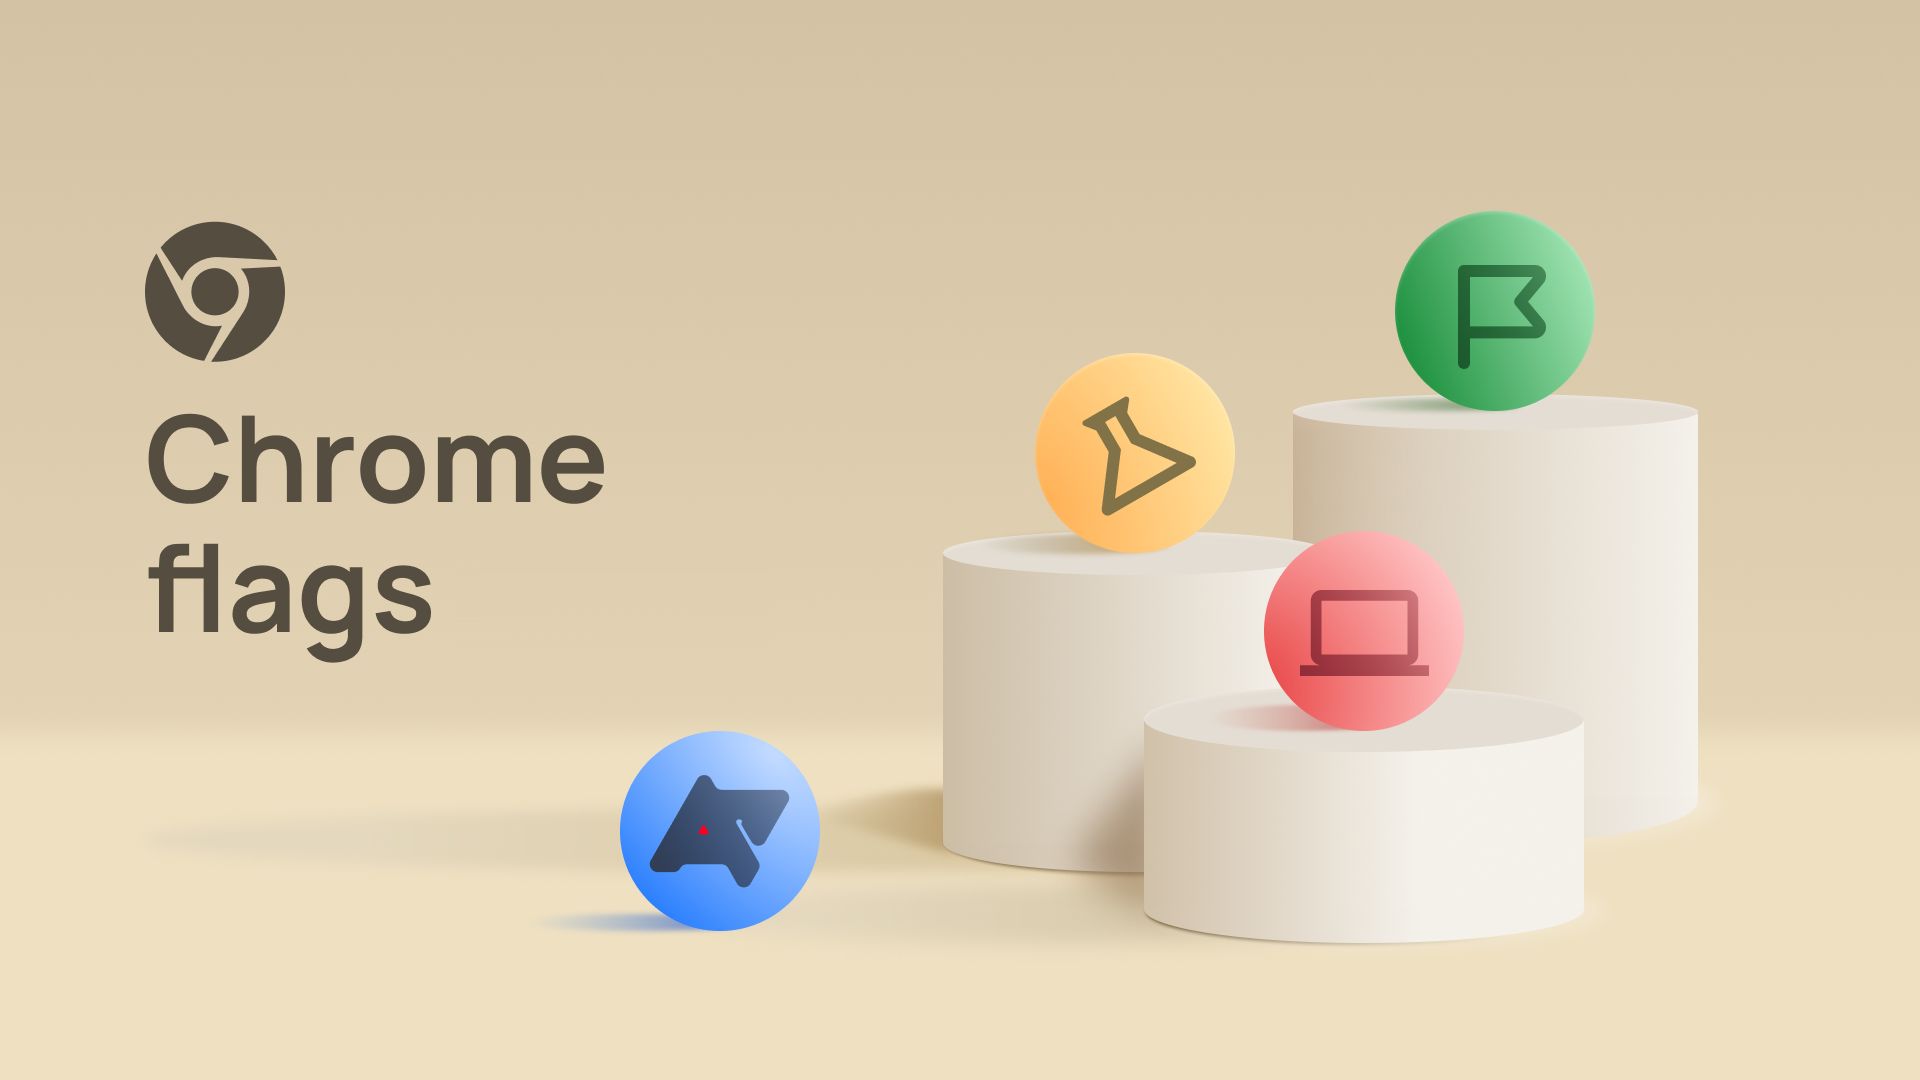 A variety of icons for Google Chrome flags.